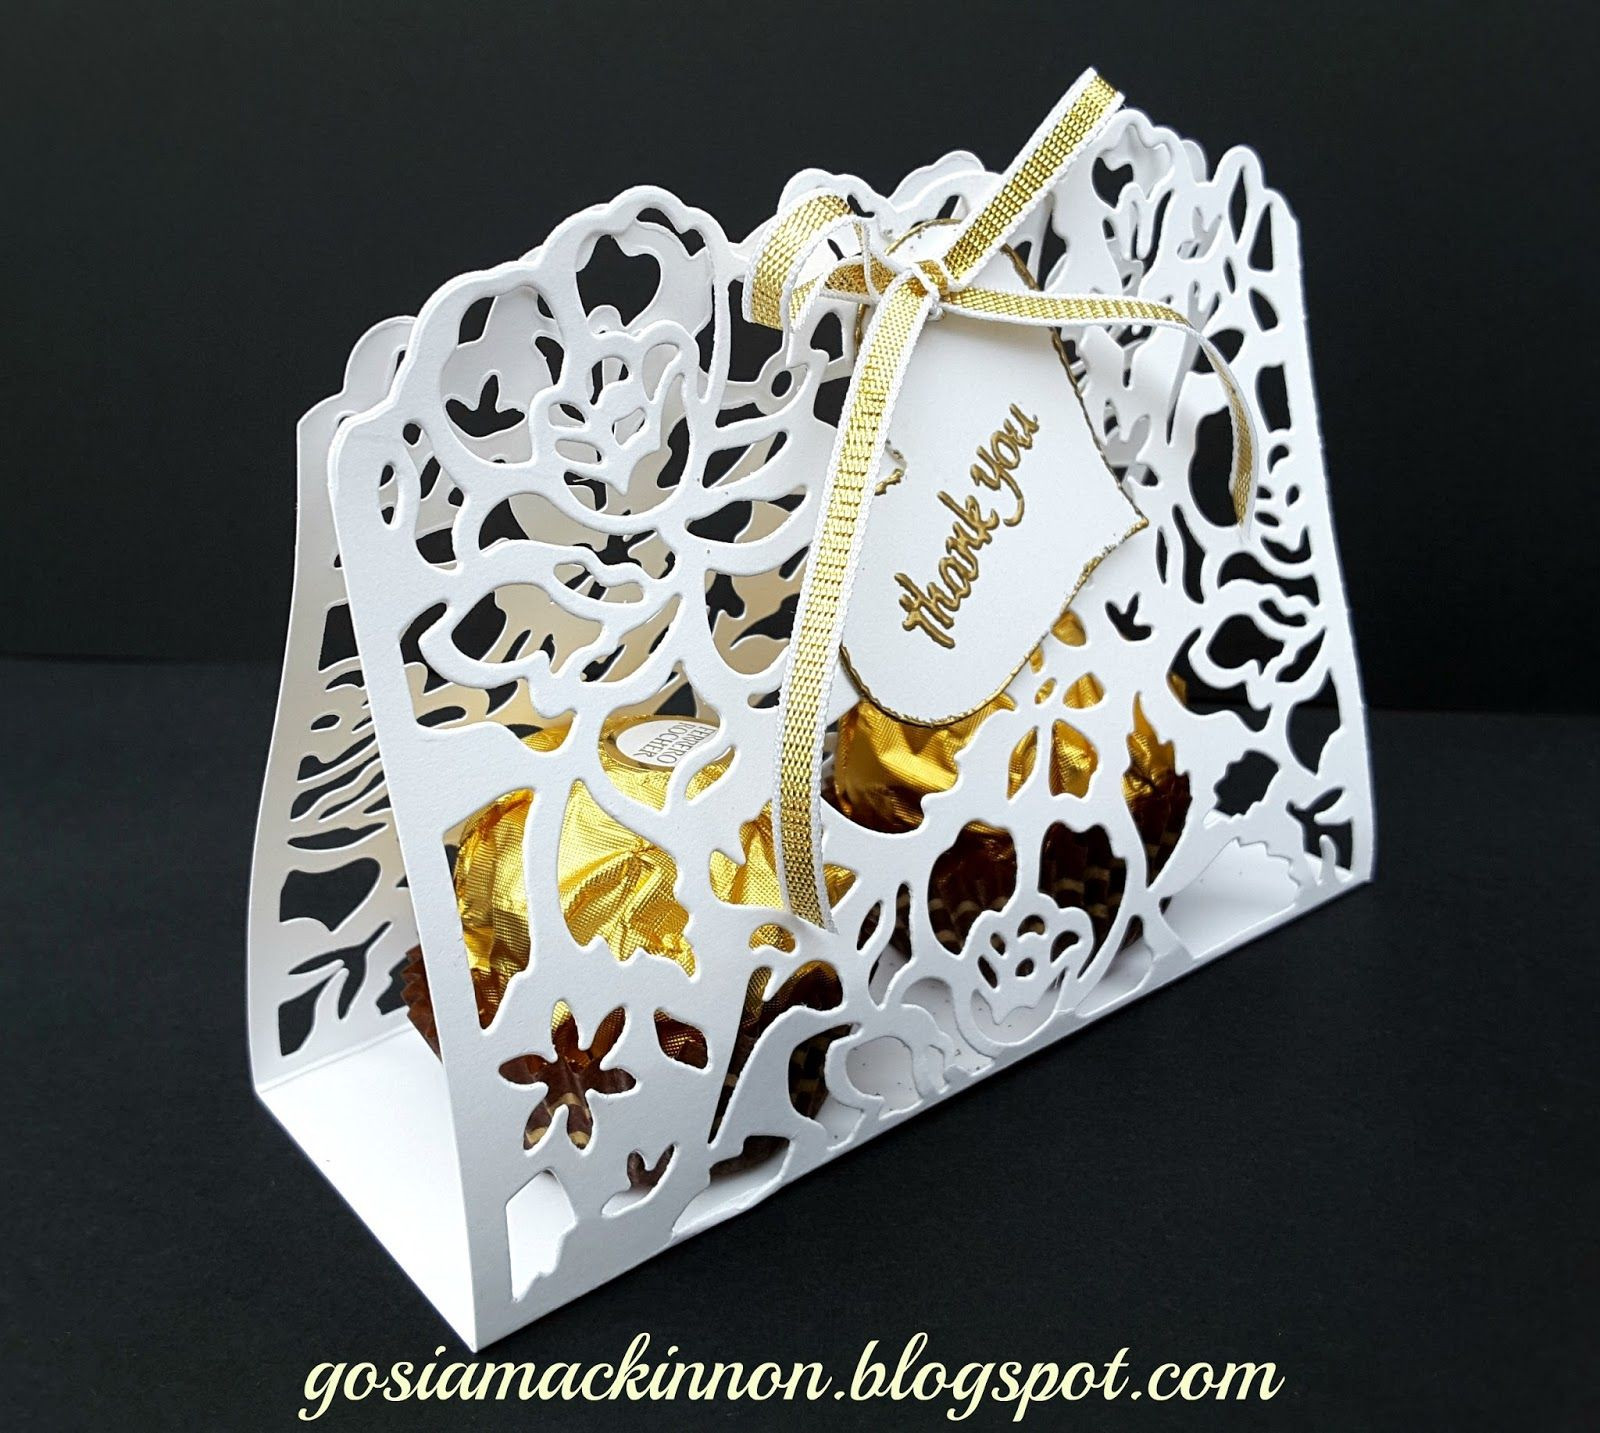 Big Thank You Gift Ideas
 Independent Stampin Up Demonstrator Gosia MacKinnon